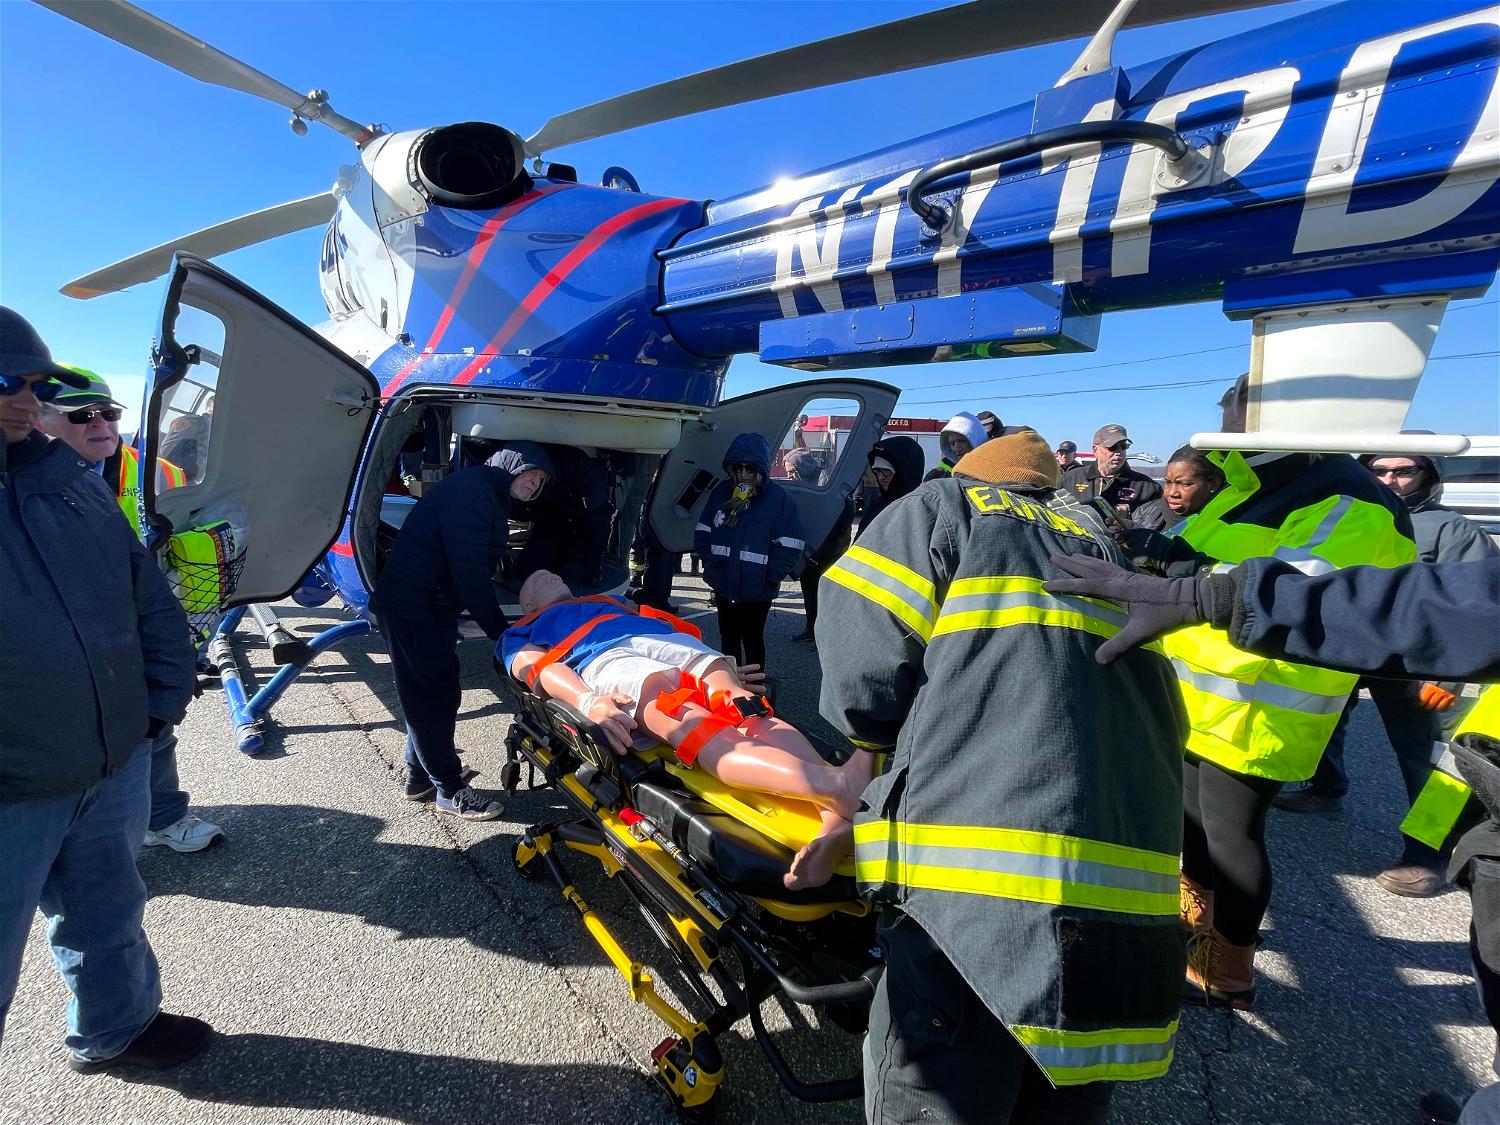 A joint medivac drill between the SCPD Aviation Section and local fire departments took place at Hobart Beach yesterday. Photo credit Lt. David Schaefer-Walker.